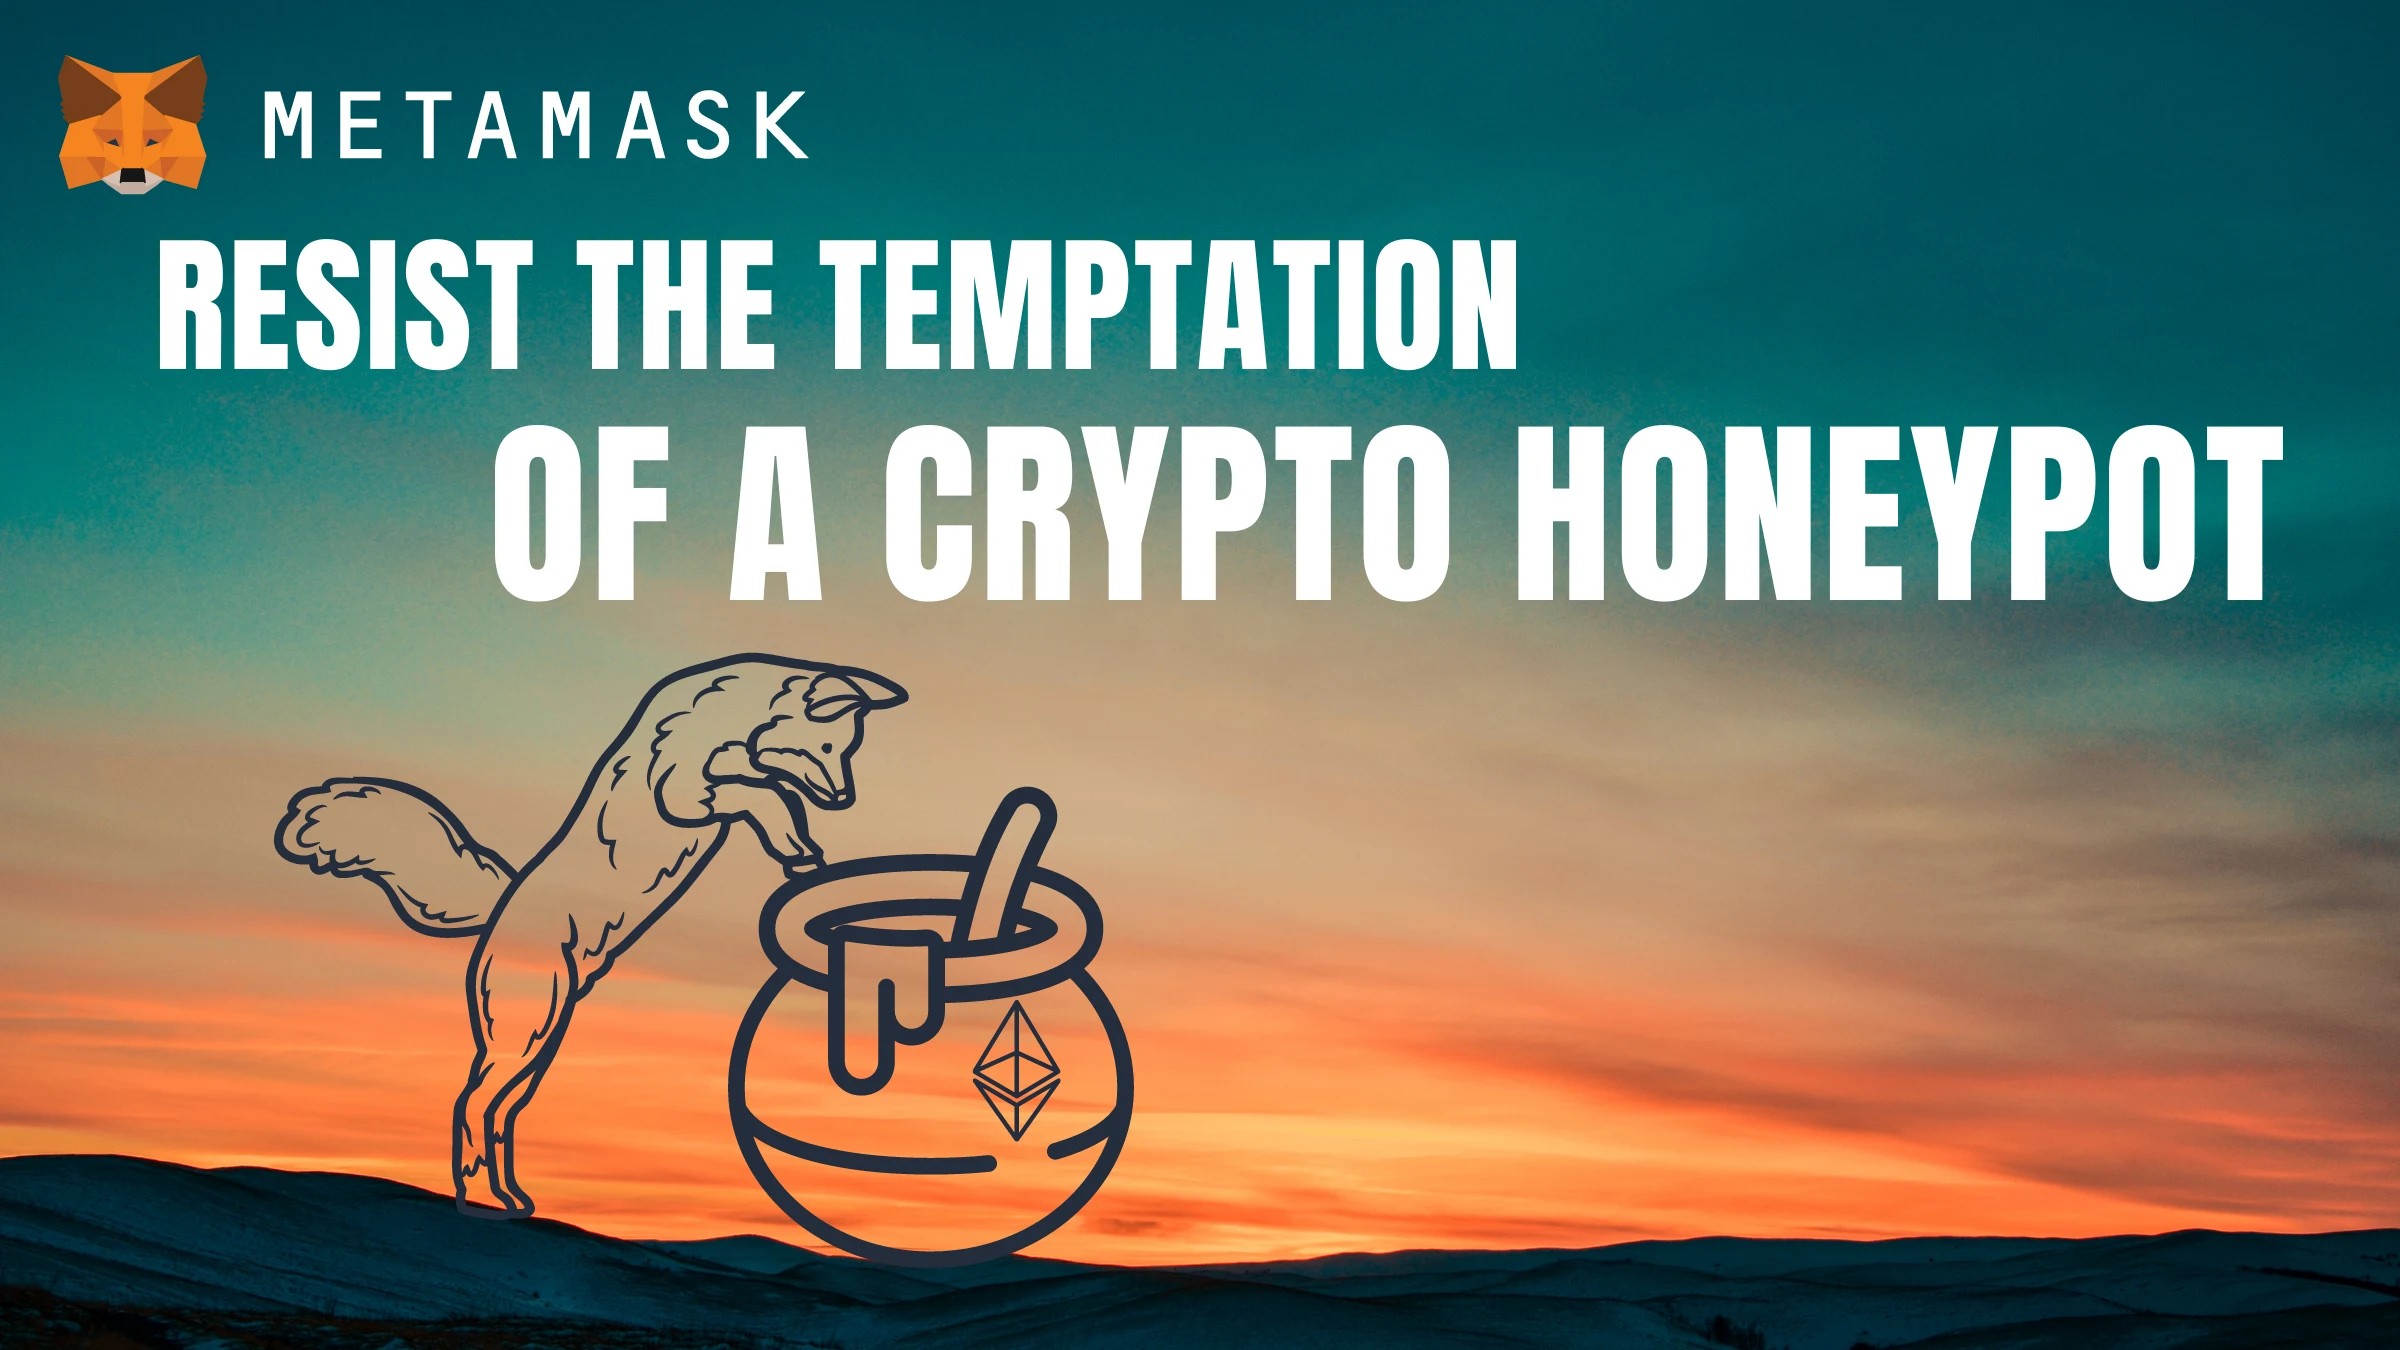 Image: Understanding and Avoiding Crypto Honeypot Scams